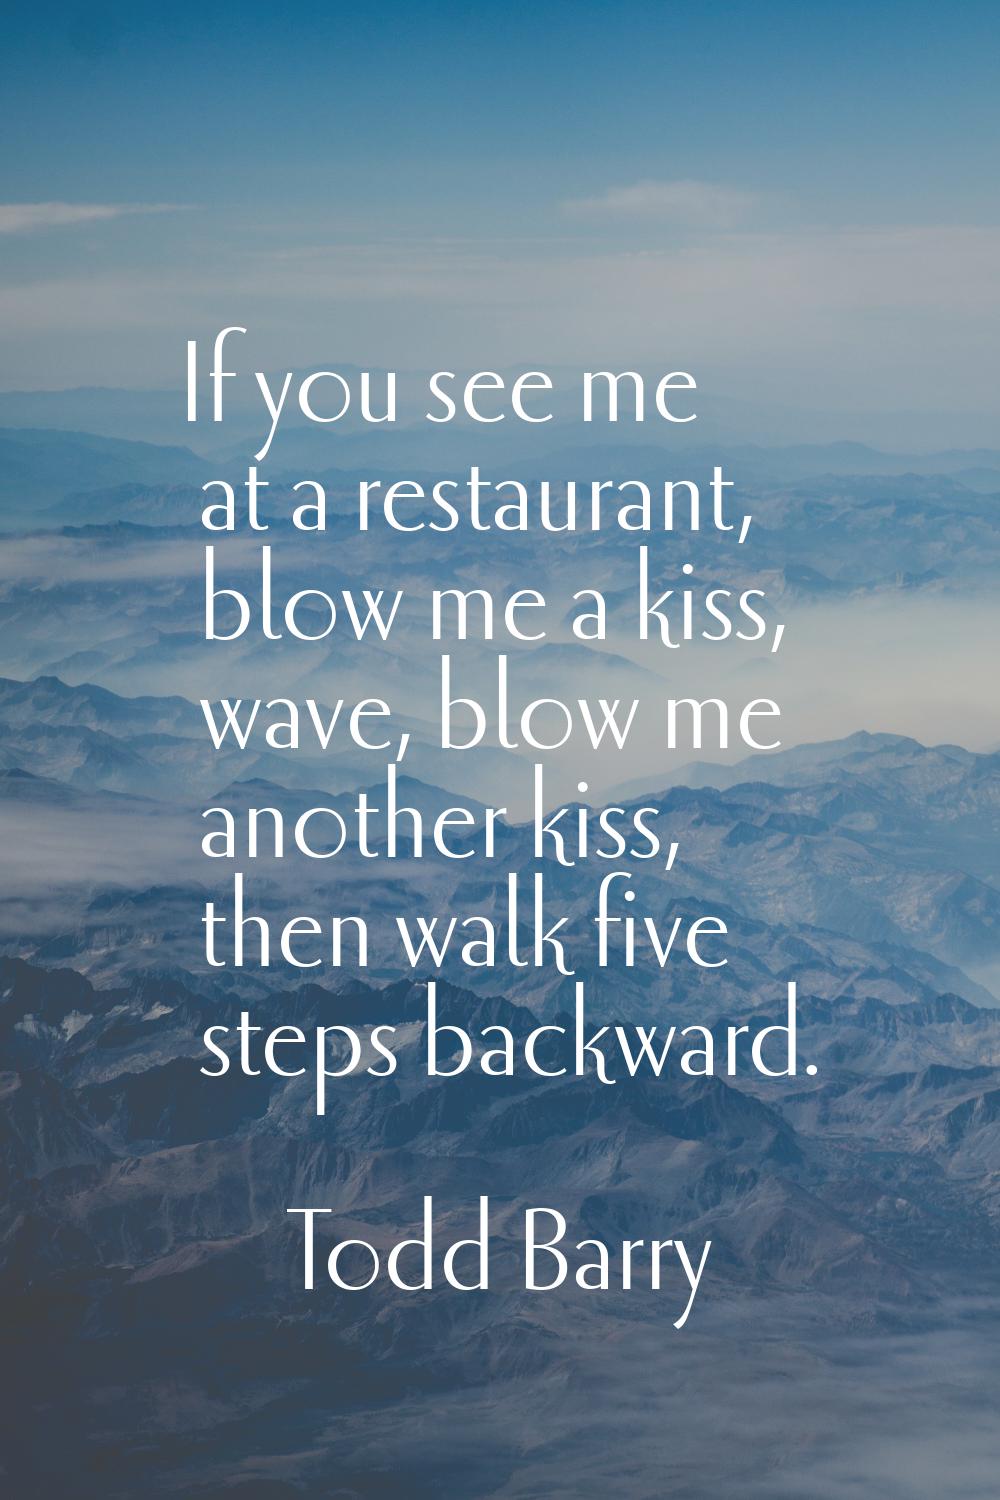 If you see me at a restaurant, blow me a kiss, wave, blow me another kiss, then walk five steps bac